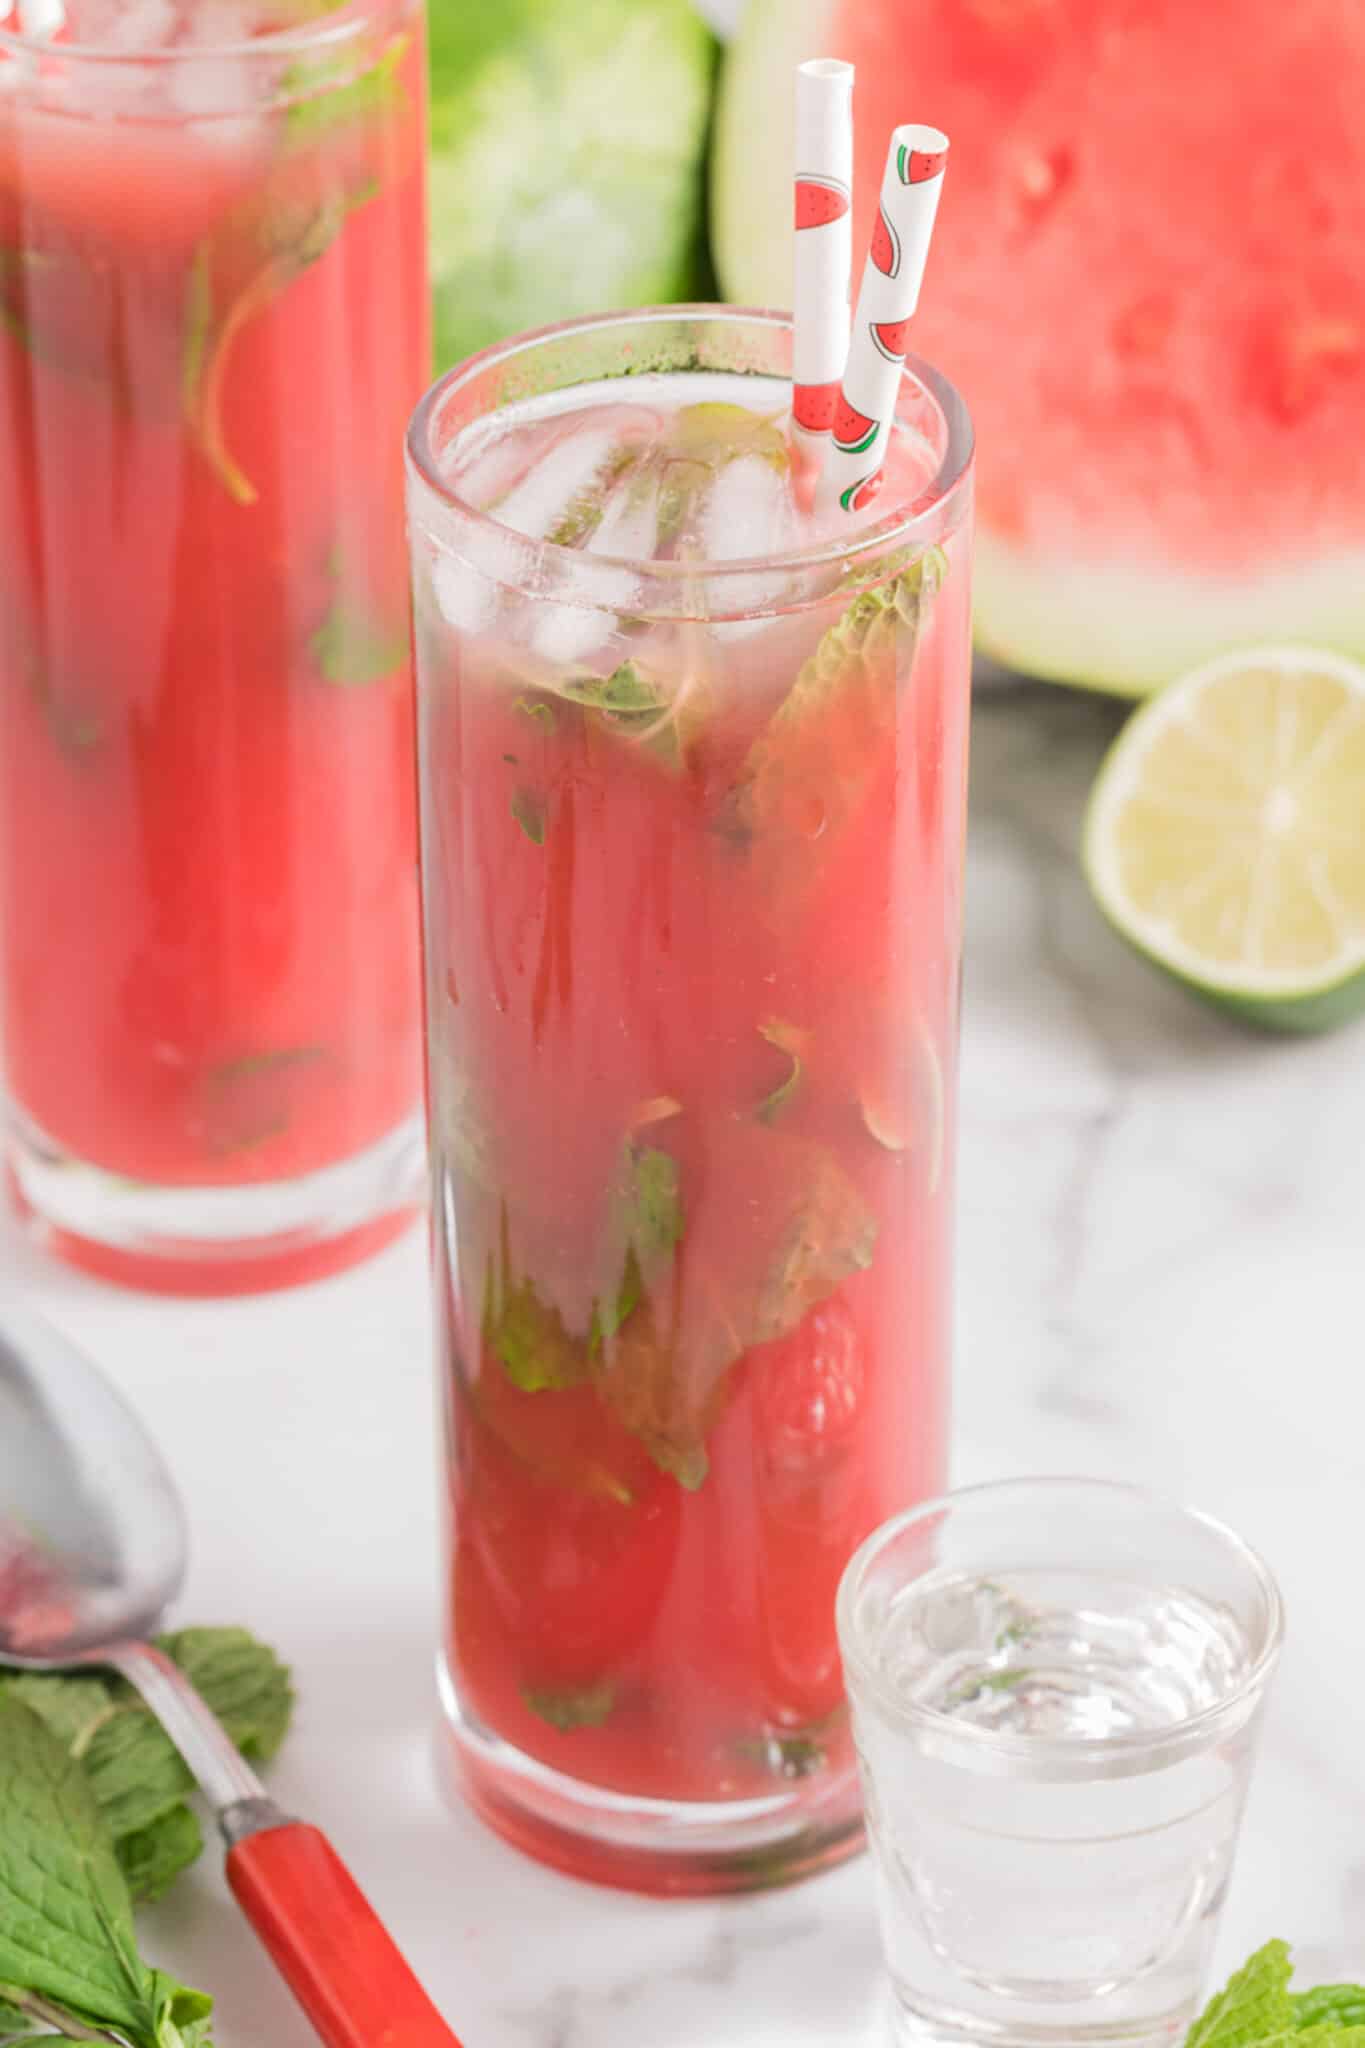 Watermelon Vodka Cocktail made with Blended Fresh Watermelon